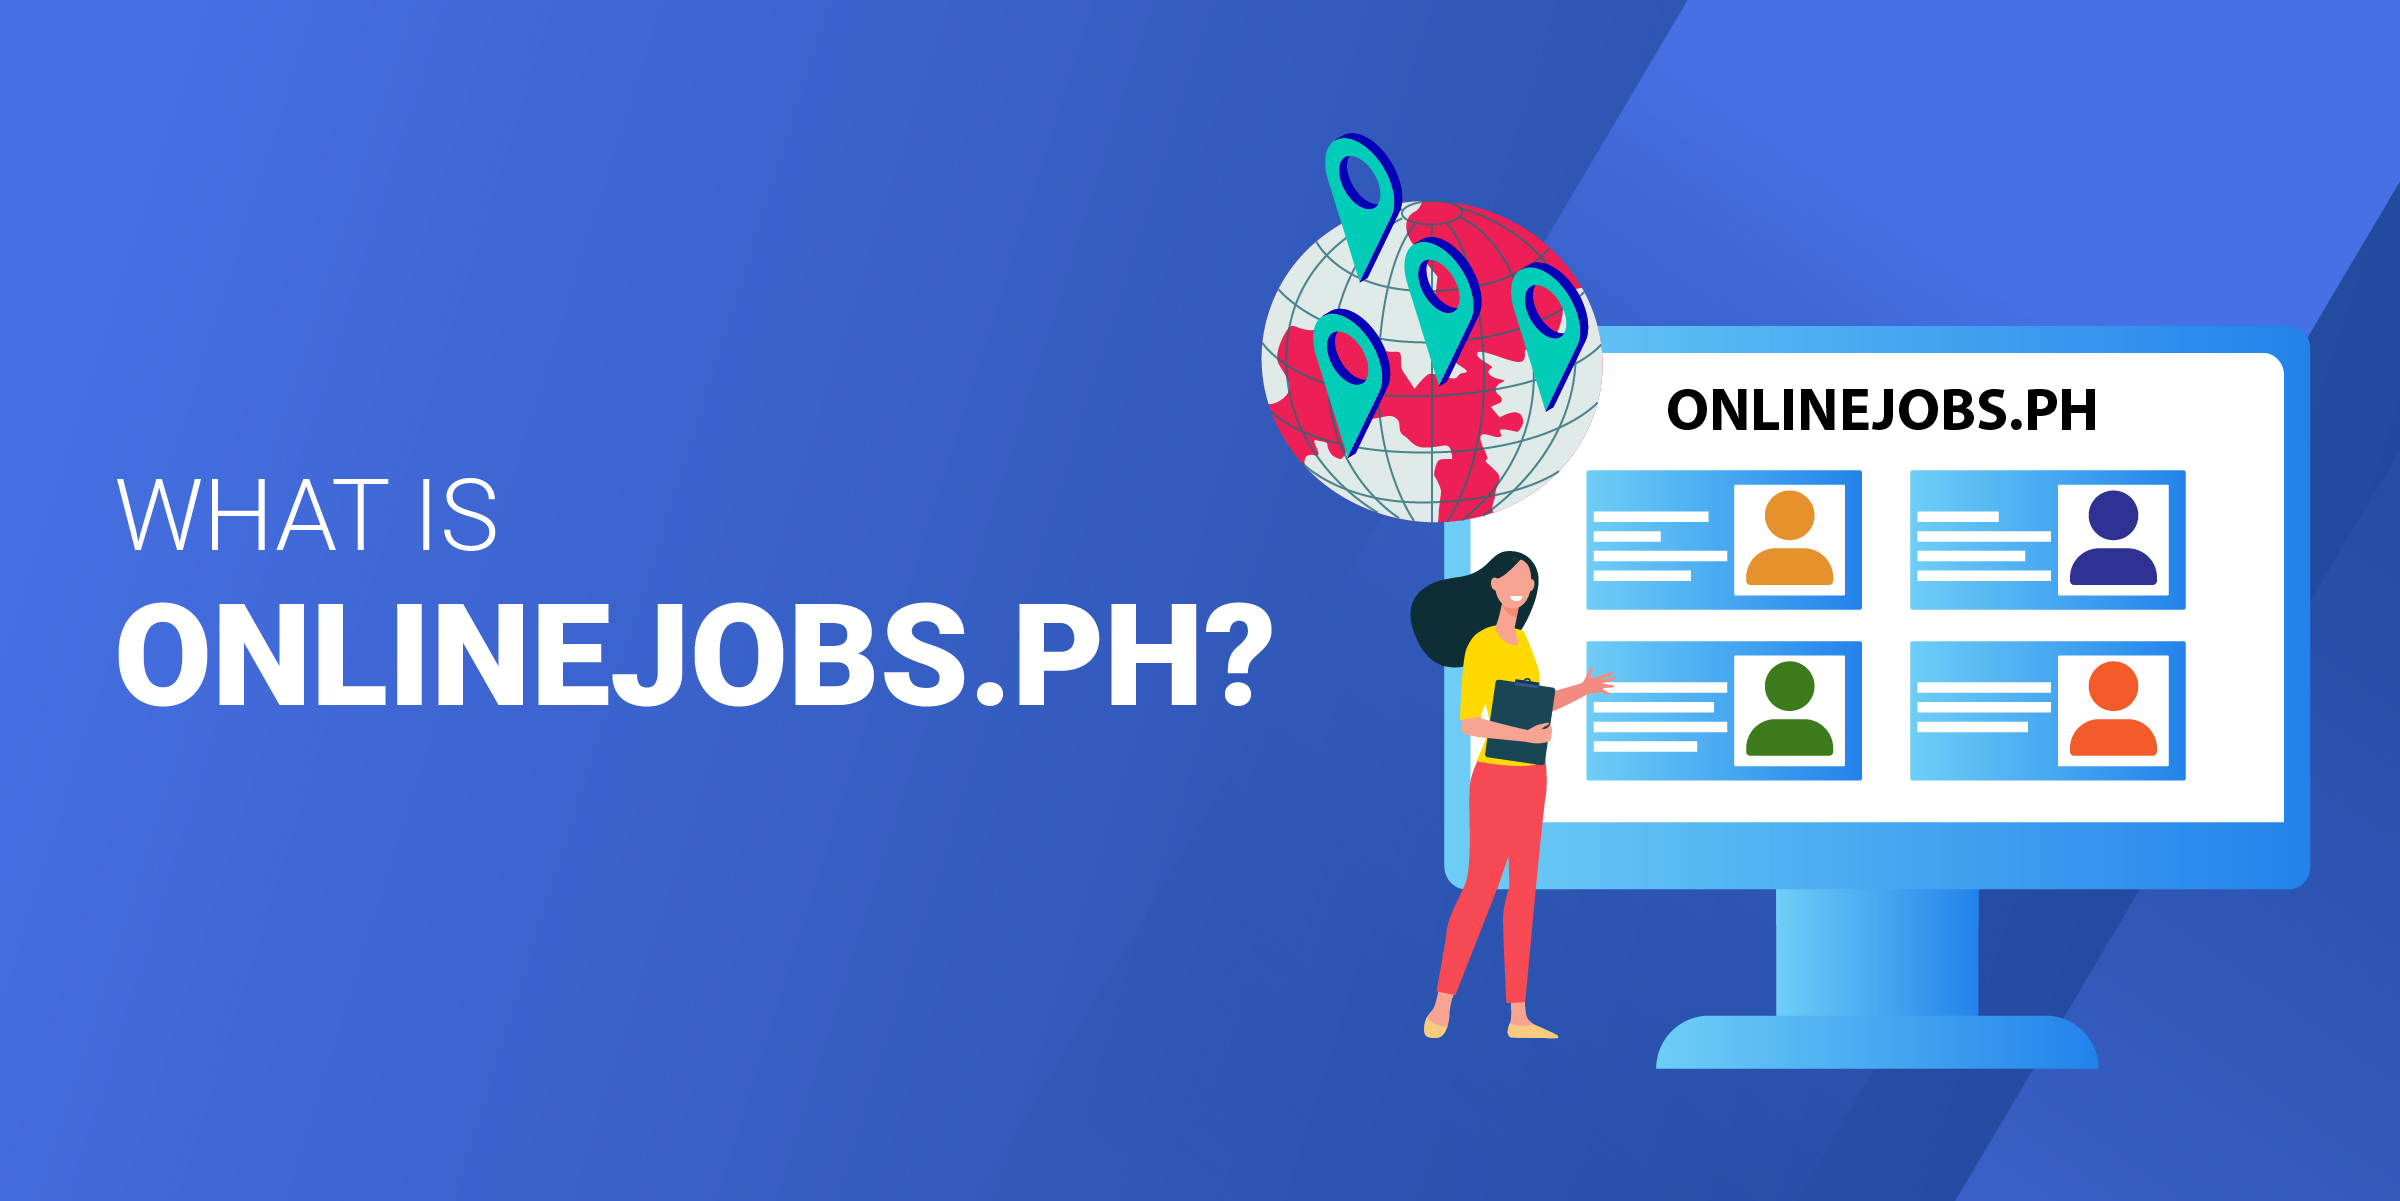 What Is OnlineJobs.PH?